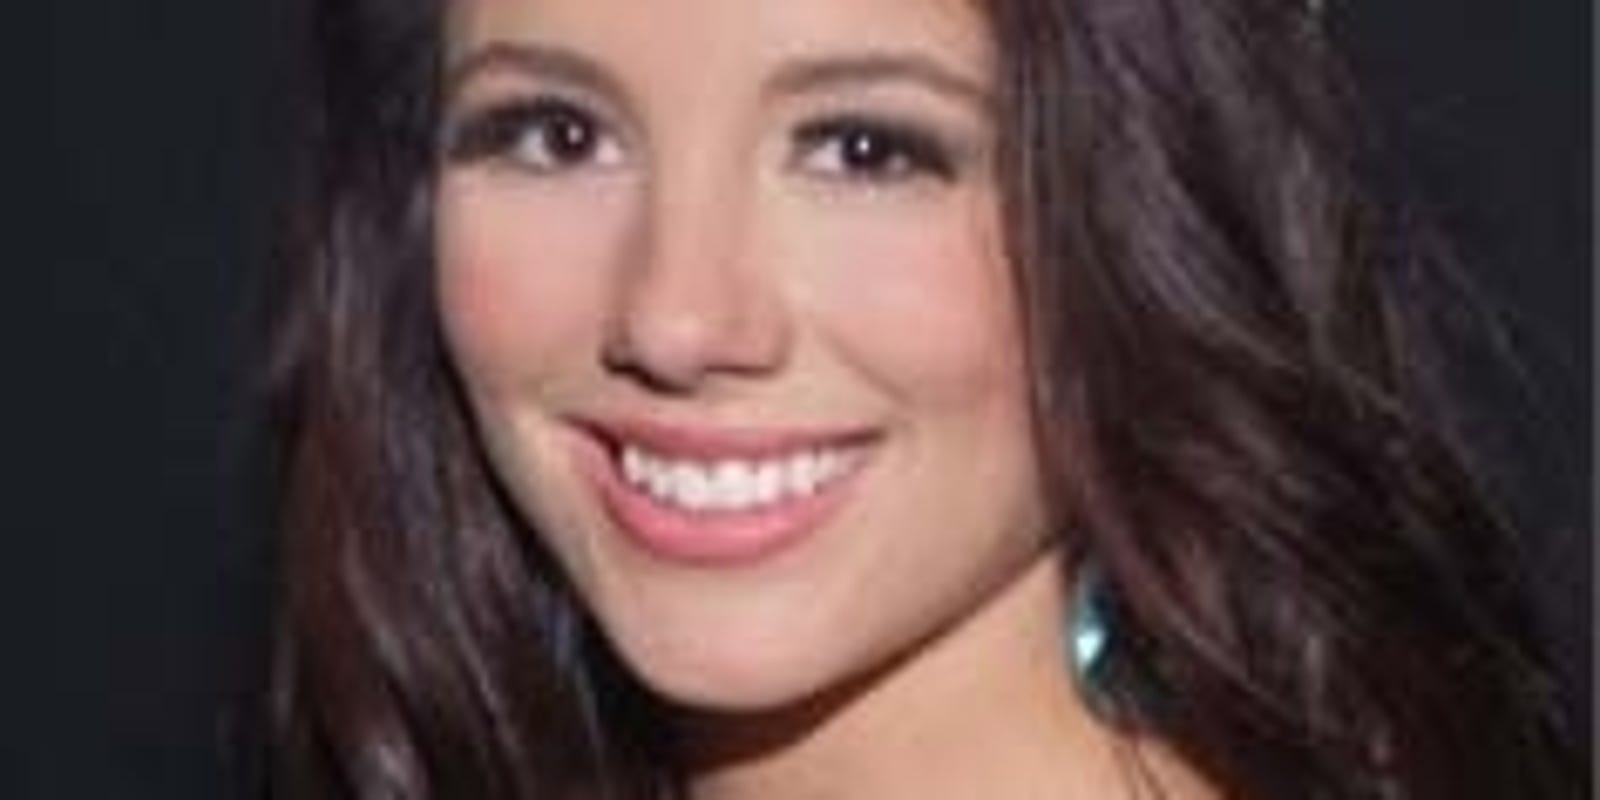 Miss Delaware Teen Usa Resigns After Sex Video Surfaces